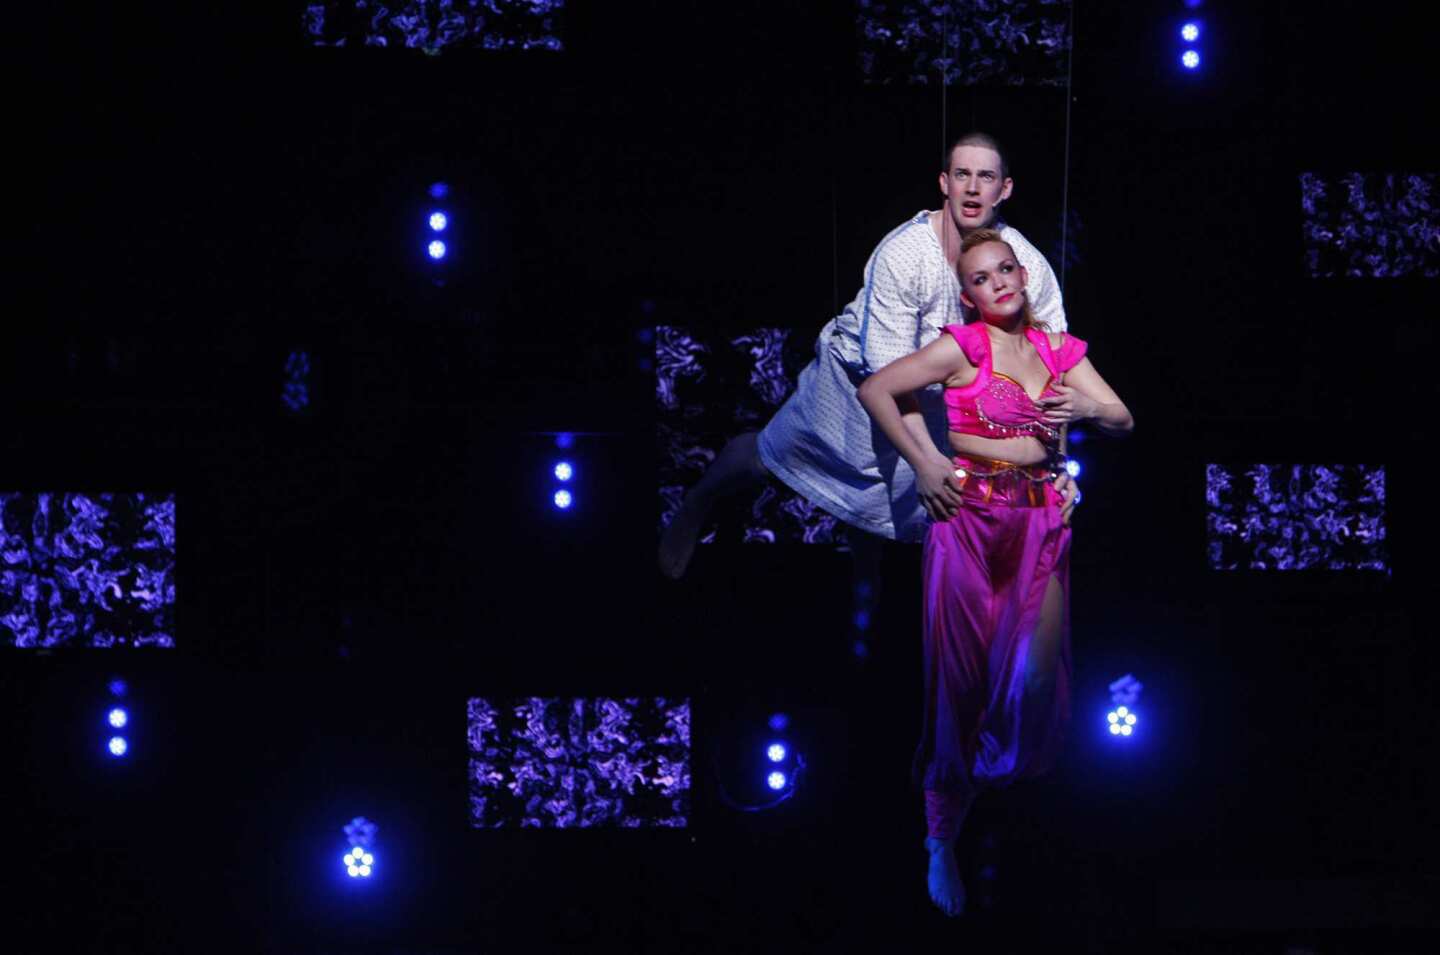 At the height of Tunny's dream, he and his nurse, portrayed by Scott J. Campbell and Nicci Claspell, enact an aerial ballet.